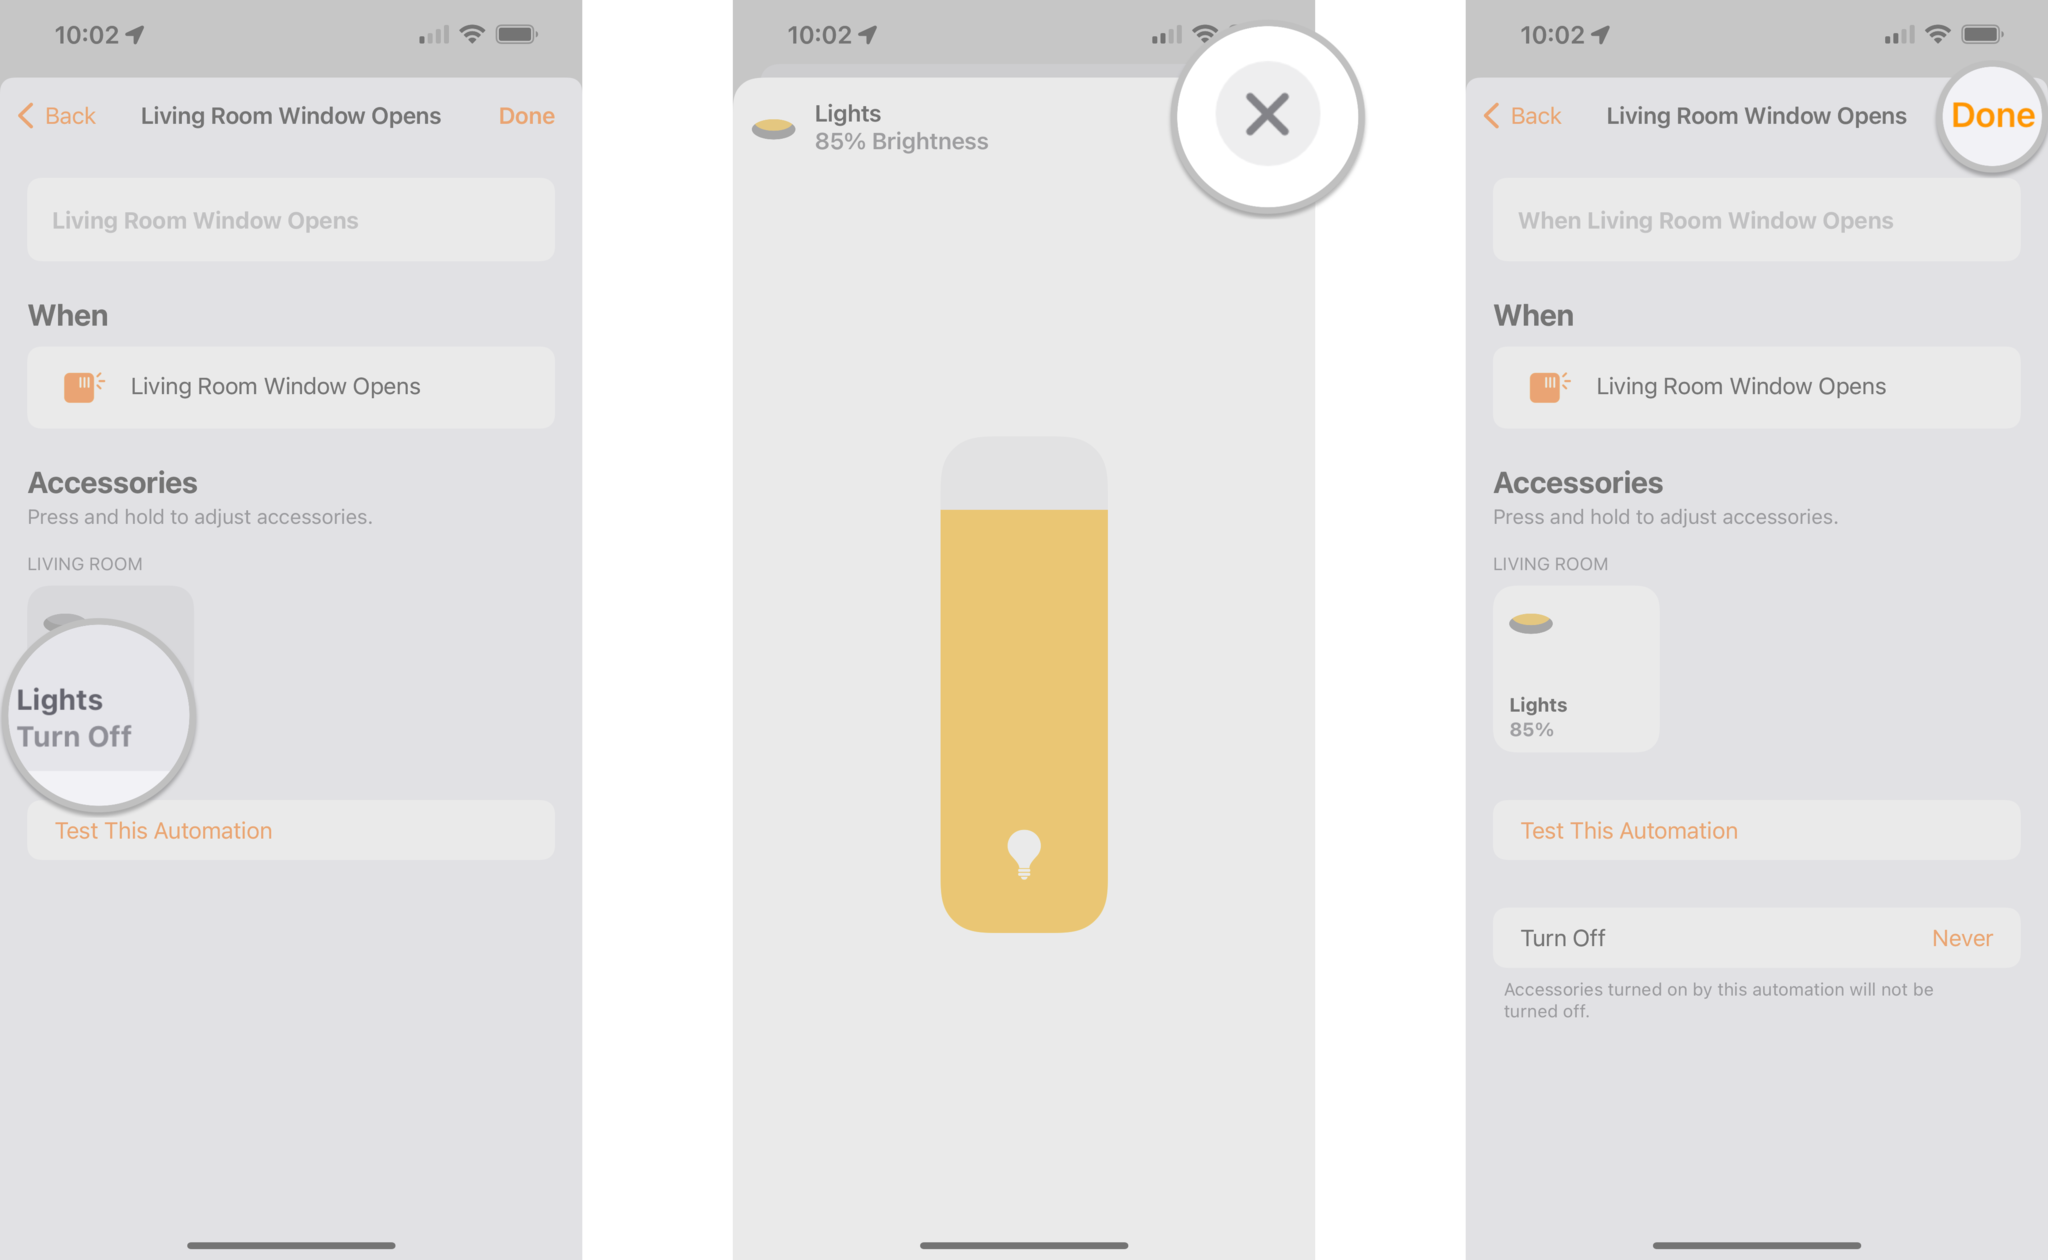 How to create an accessory automation in the Home app on the iPhone by showing steps: Tap and hold on an accessory, Tap the X button after making changes, Tap Done